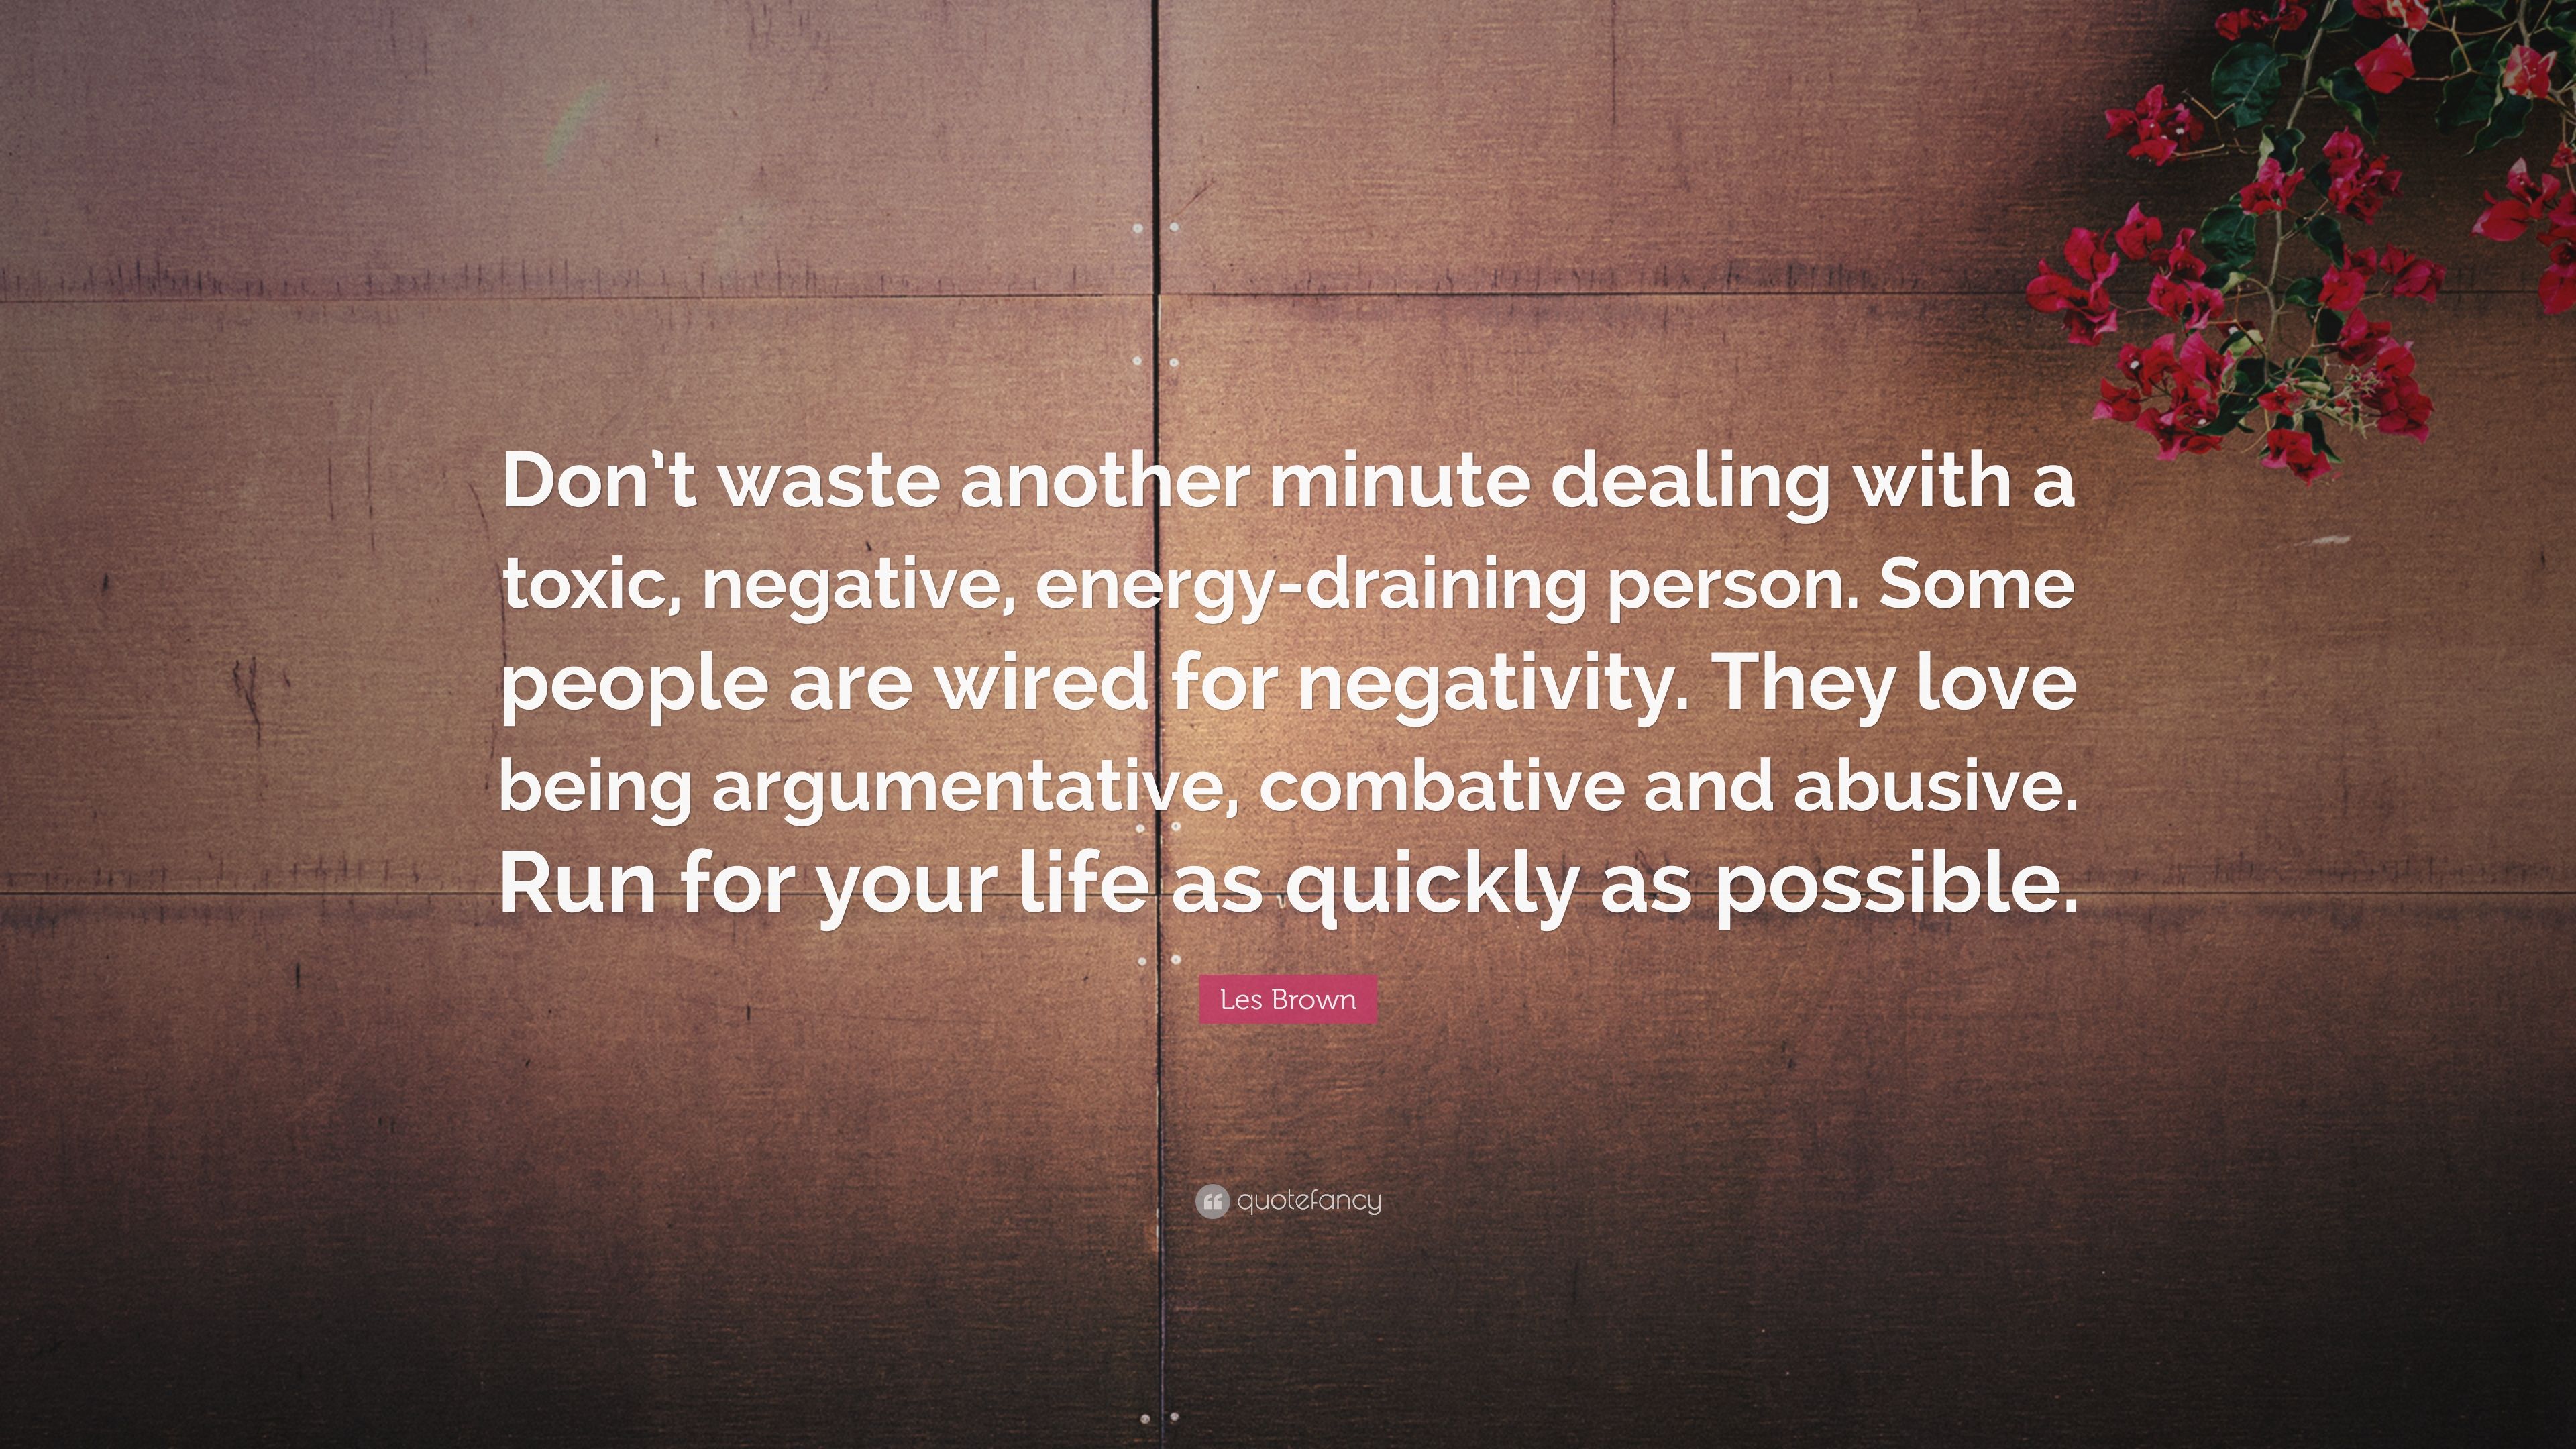 Les Brown Quote: “Don't Waste Another Minute Dealing With A Toxic, Negative, Energy Draining Person. Some People Are Wired For Negativity.” (12 Wallpaper)